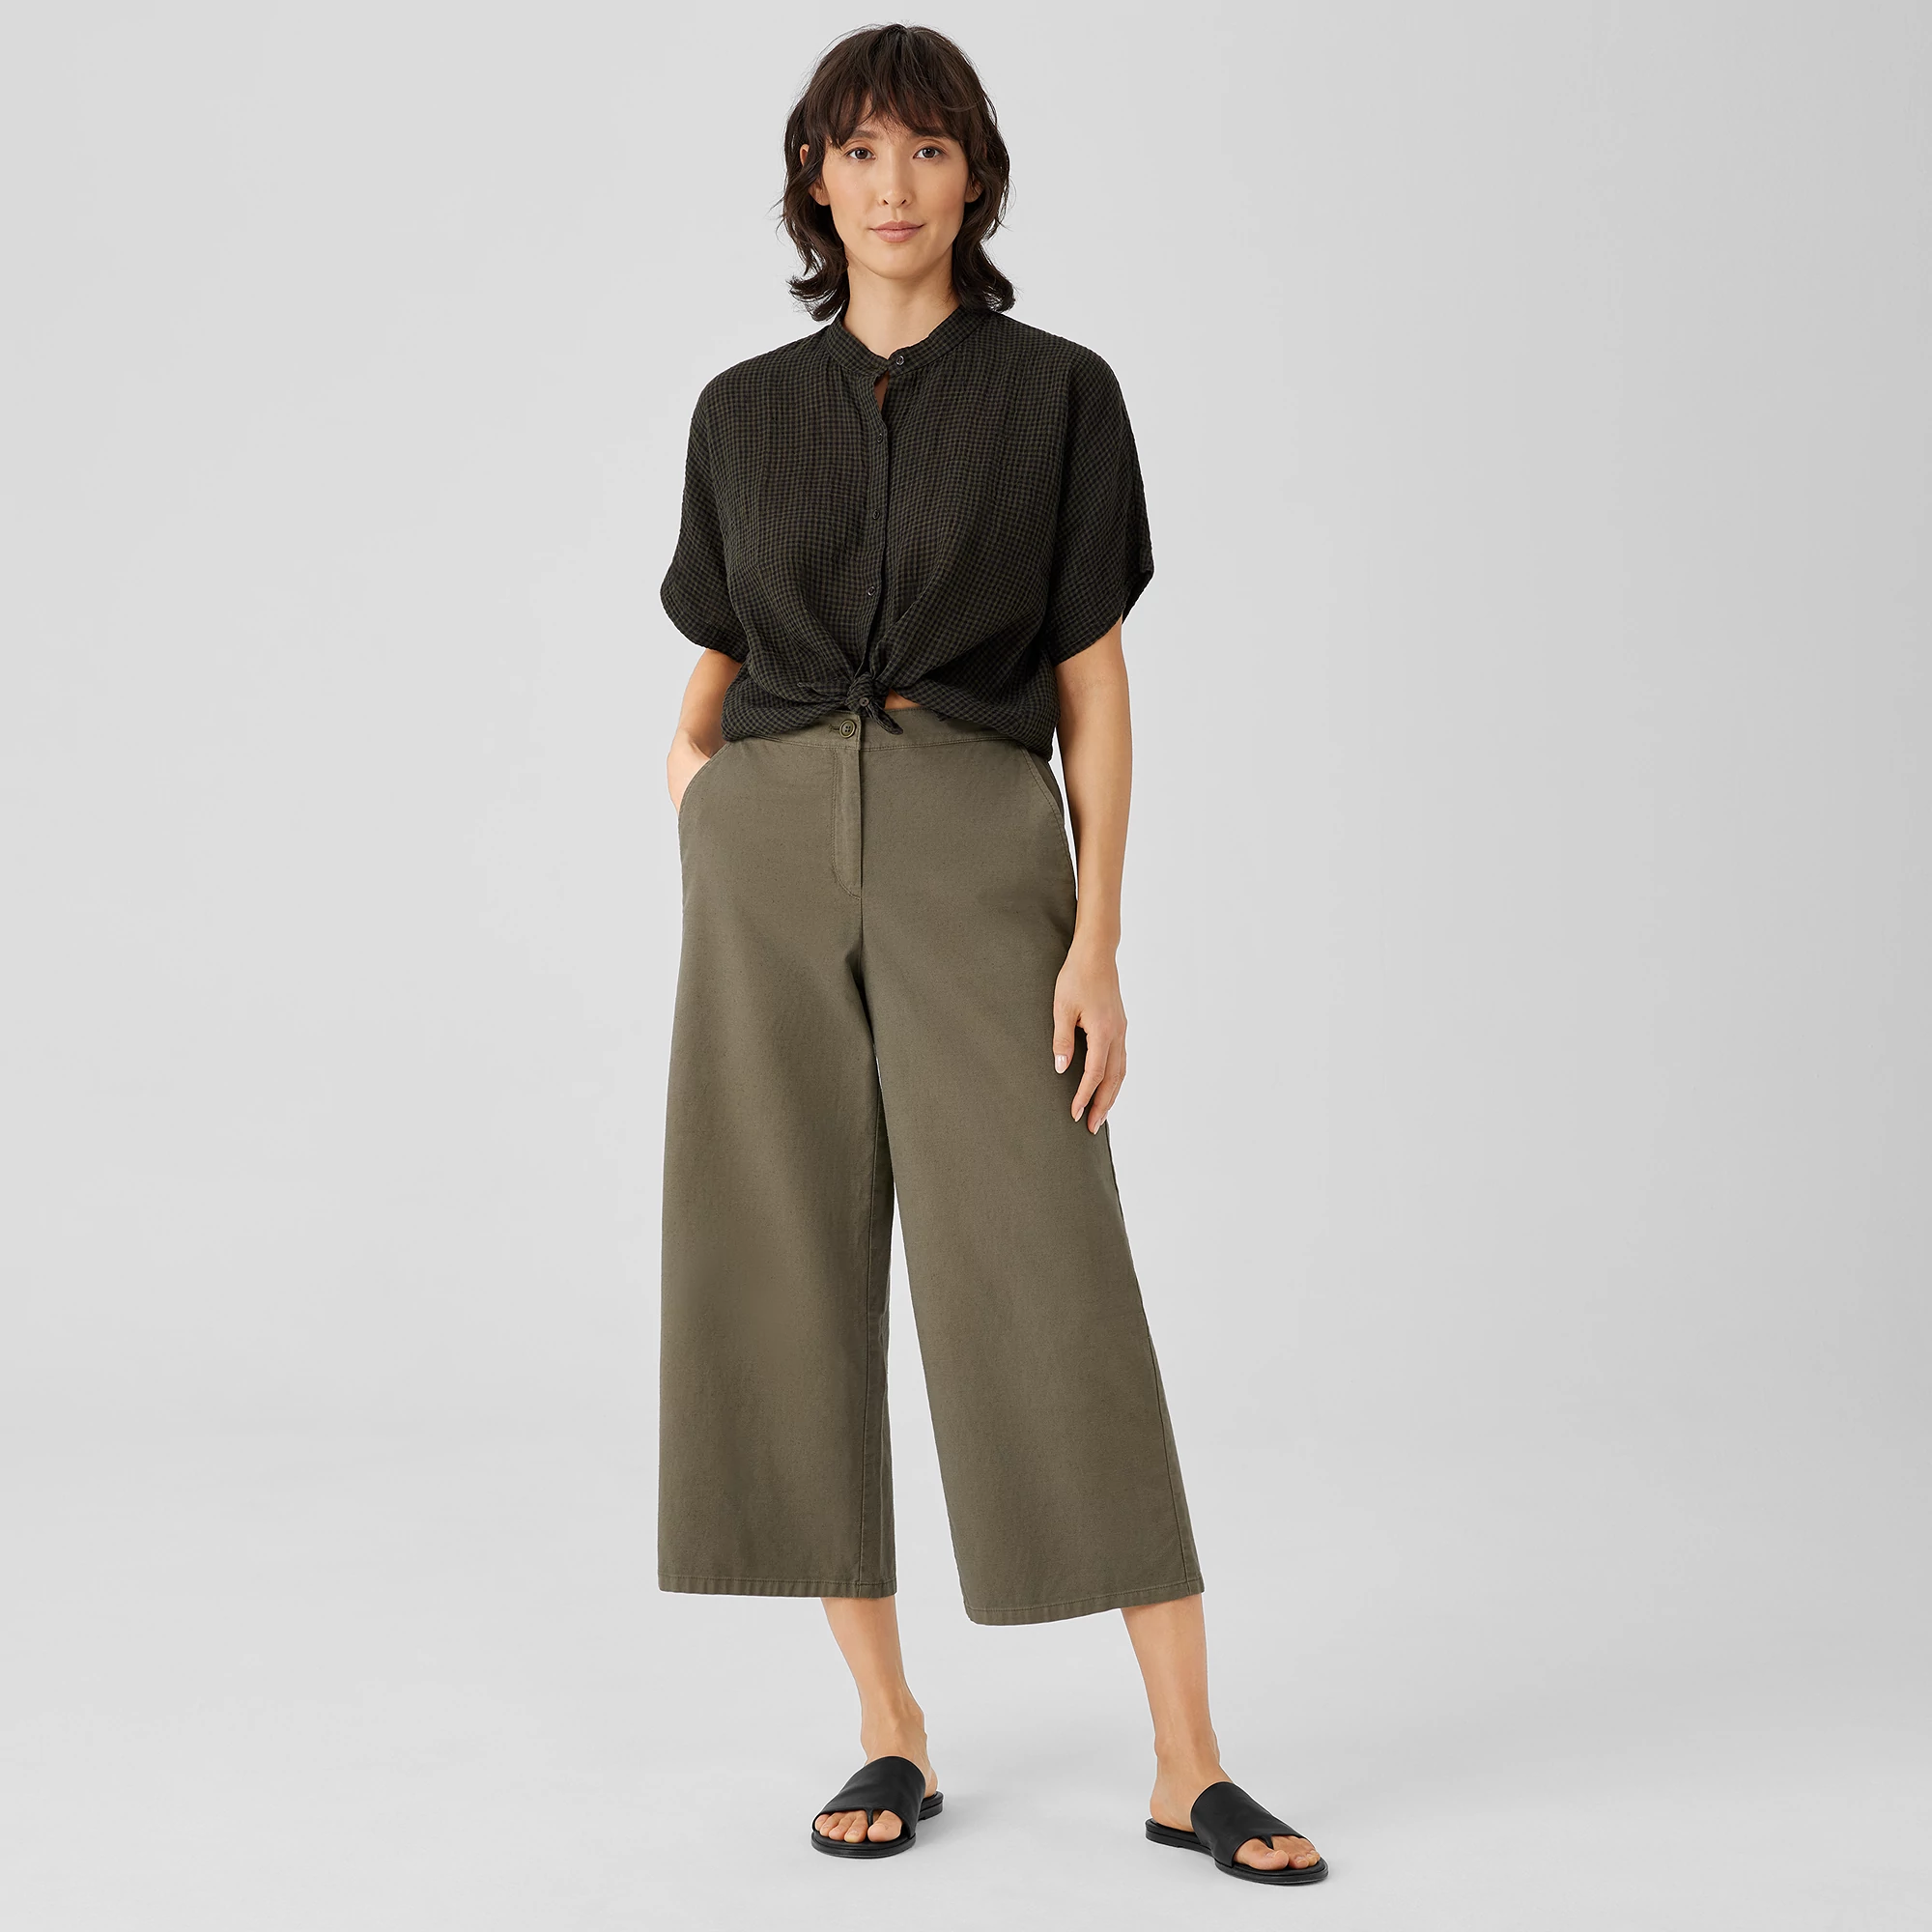 1X Eileen Fisher Plus Black Cotton Stretch Jersey Wide Cropped Pants 